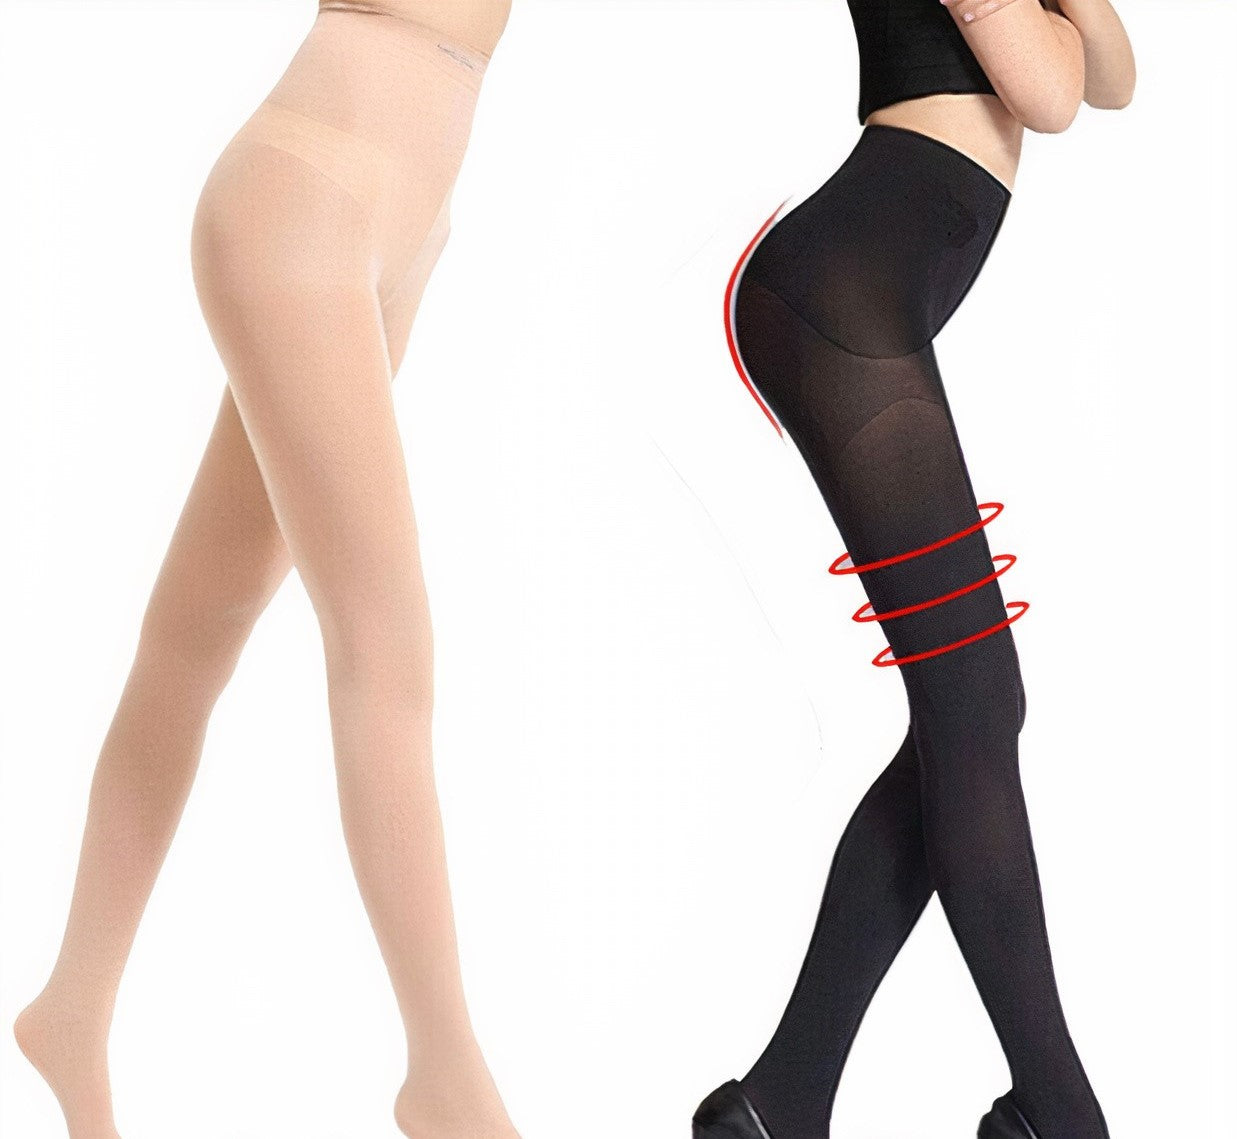 Women Fake Translucent Flawless Legs, Form-fitting, Breathable Fleeced  Pantyhose /tights/stockings. One Size Regular -  Canada